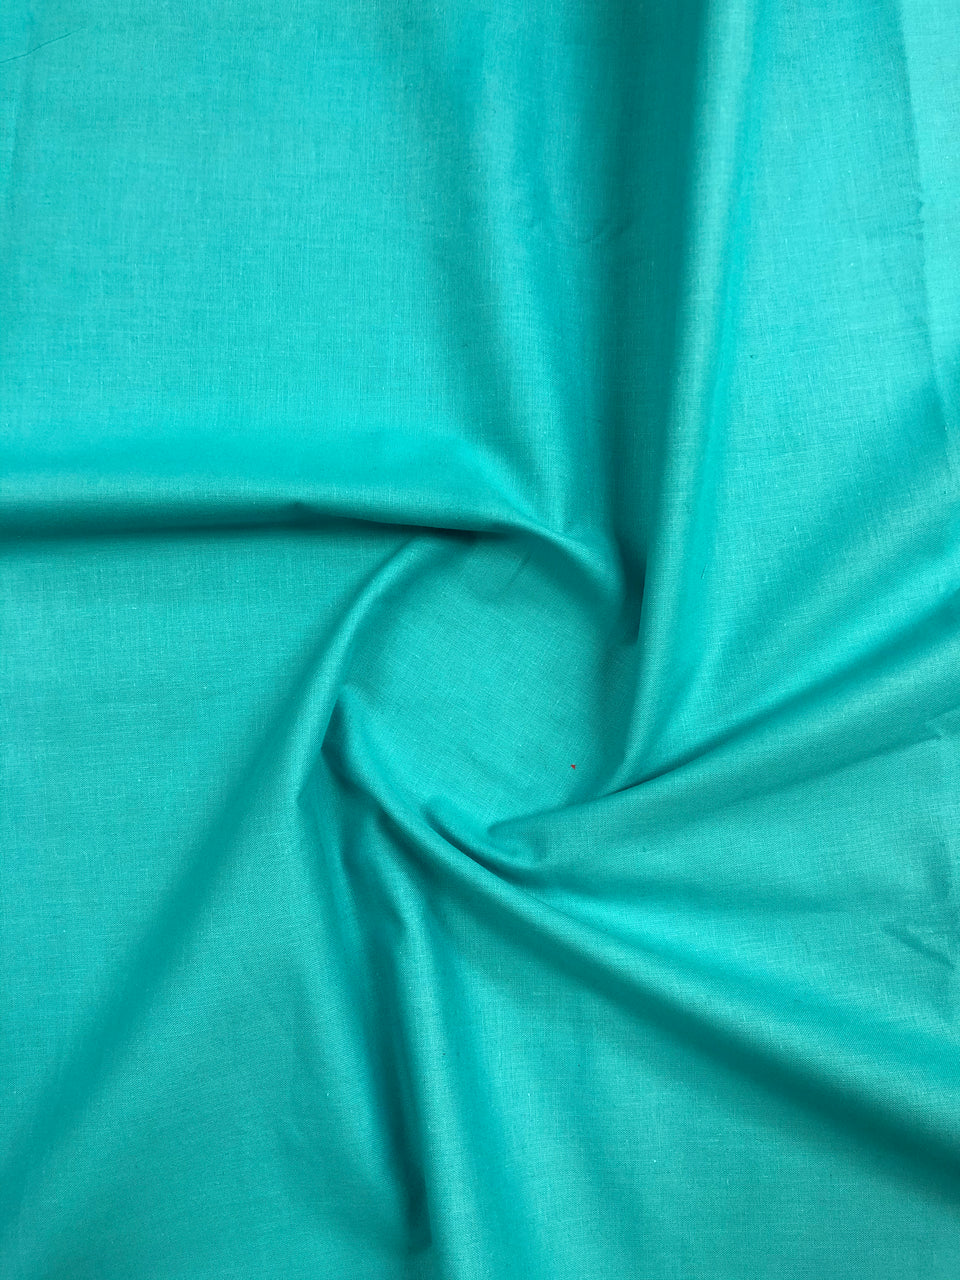 Turquoise - Quilting Cotton